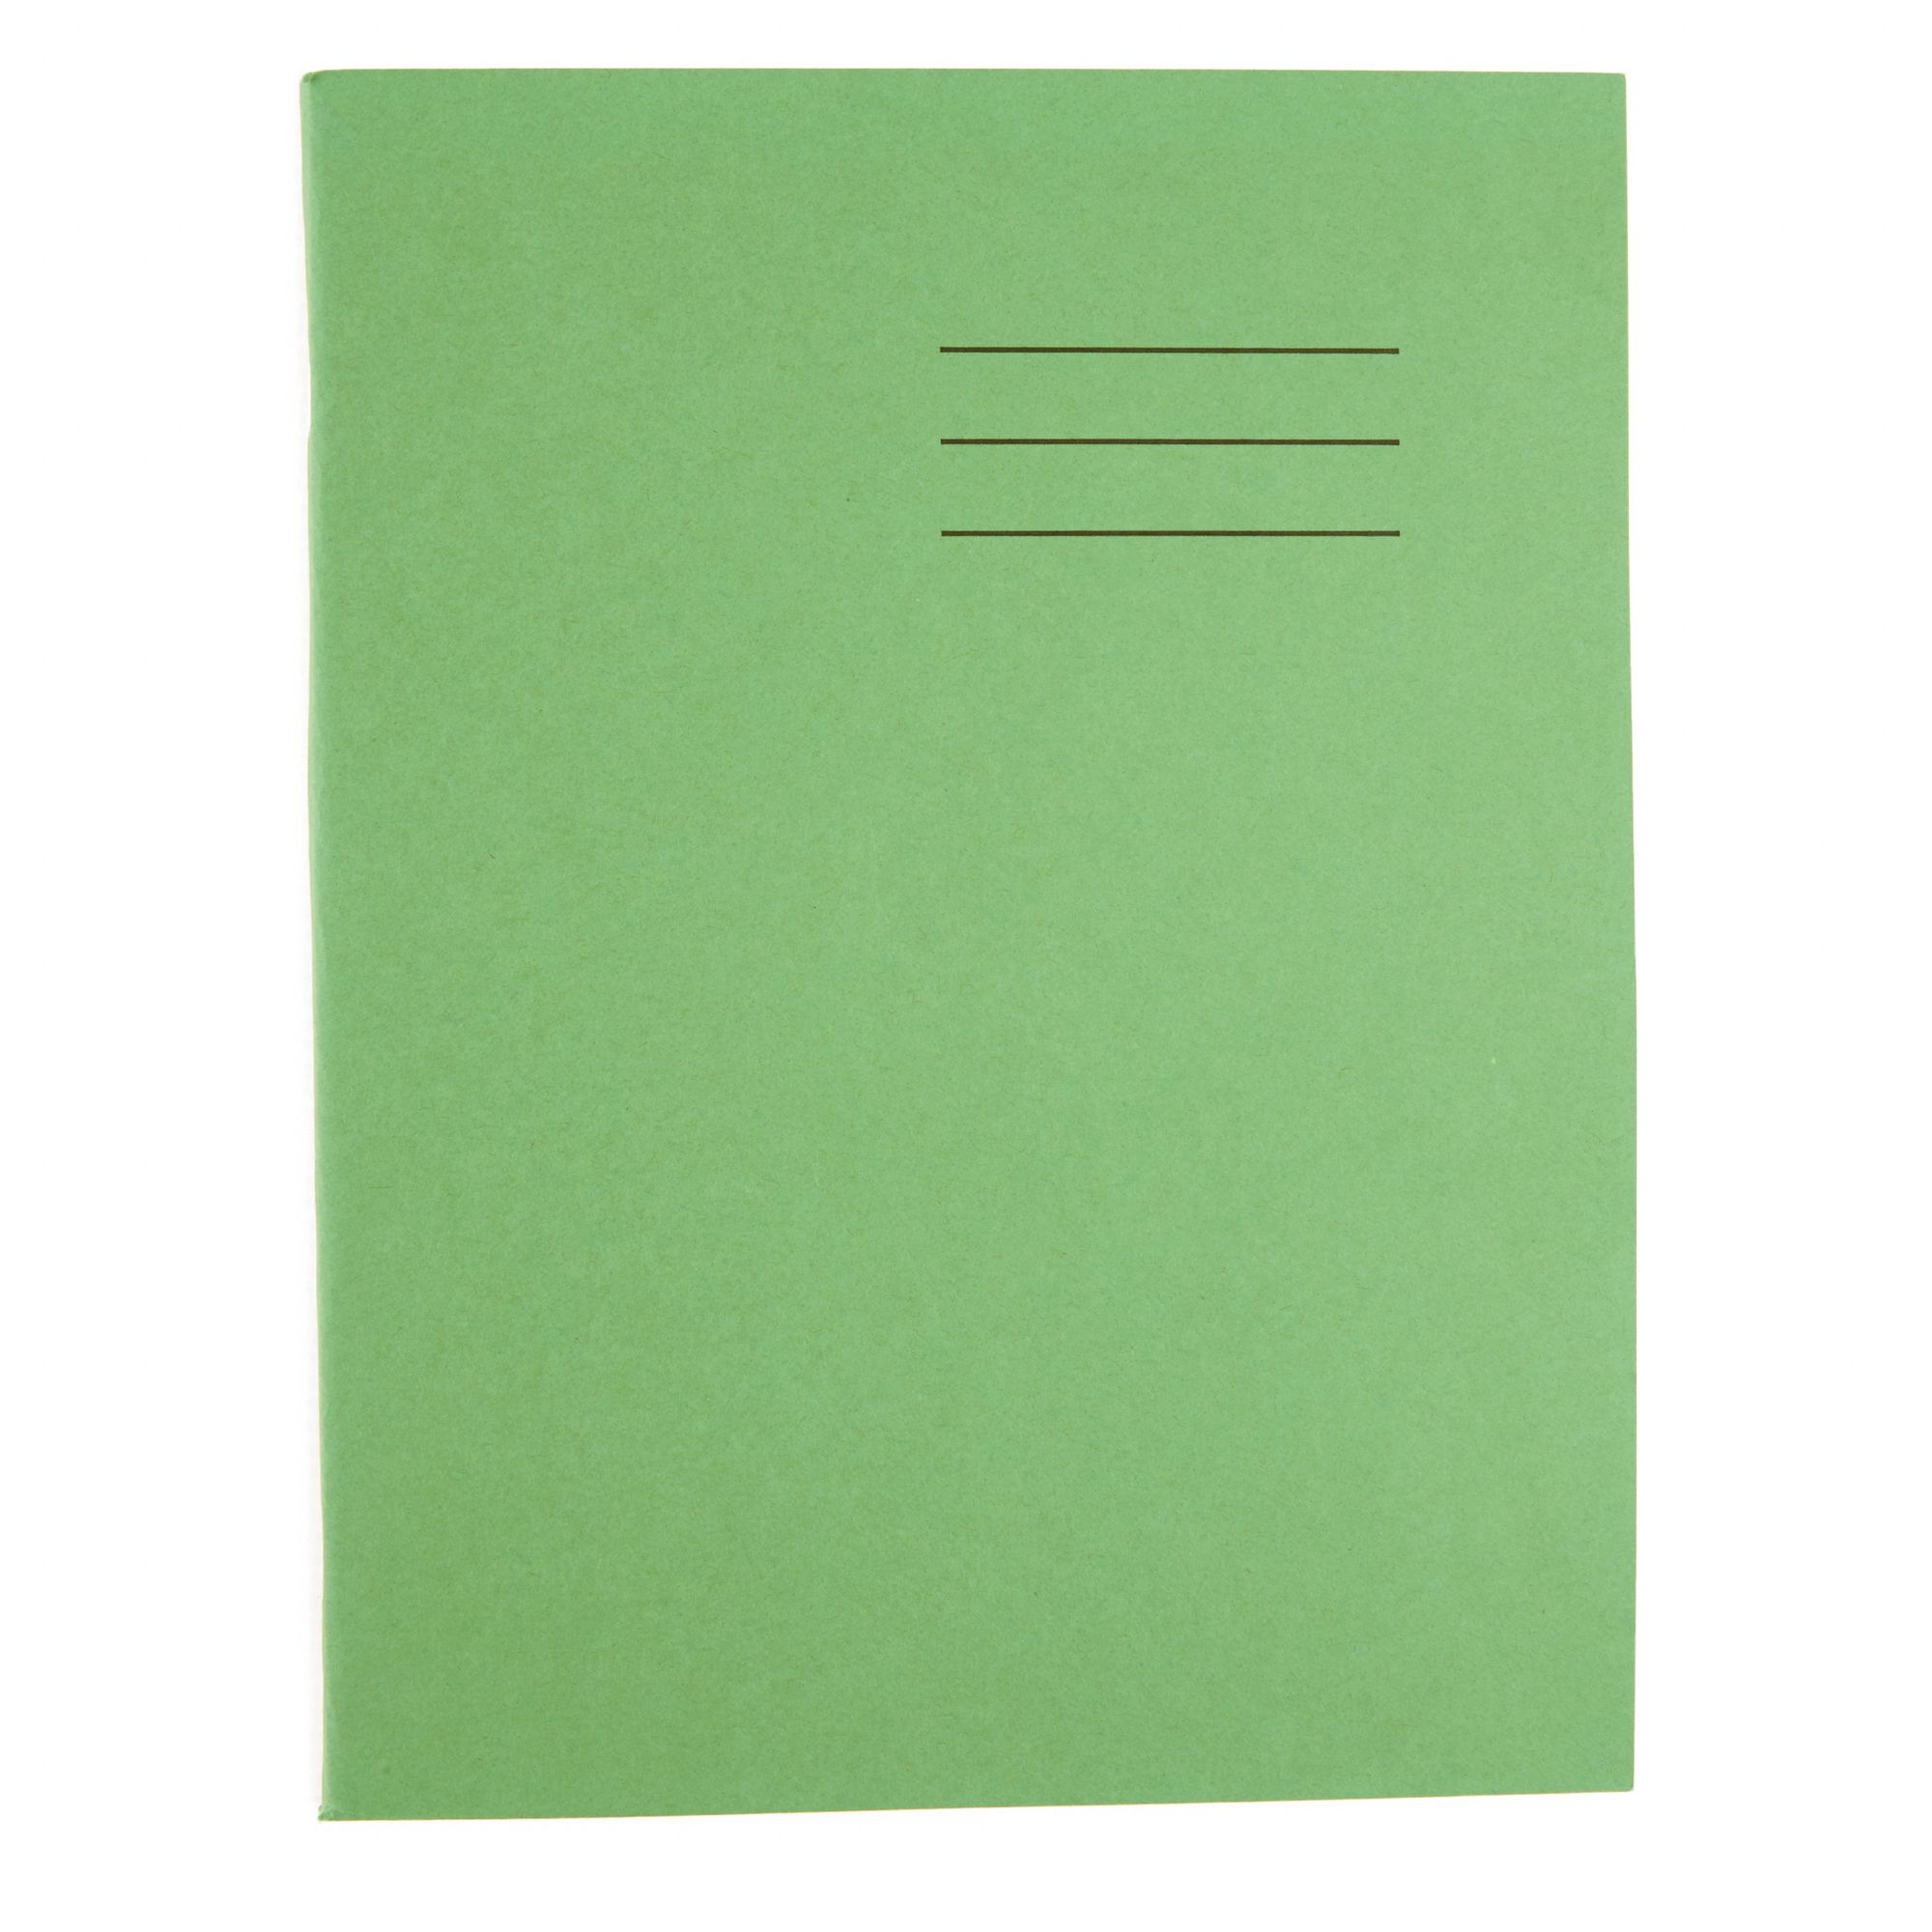 A4 Exercise Book 80 Page, 6mm Ruled with Margin, Light Green - Pack of 50